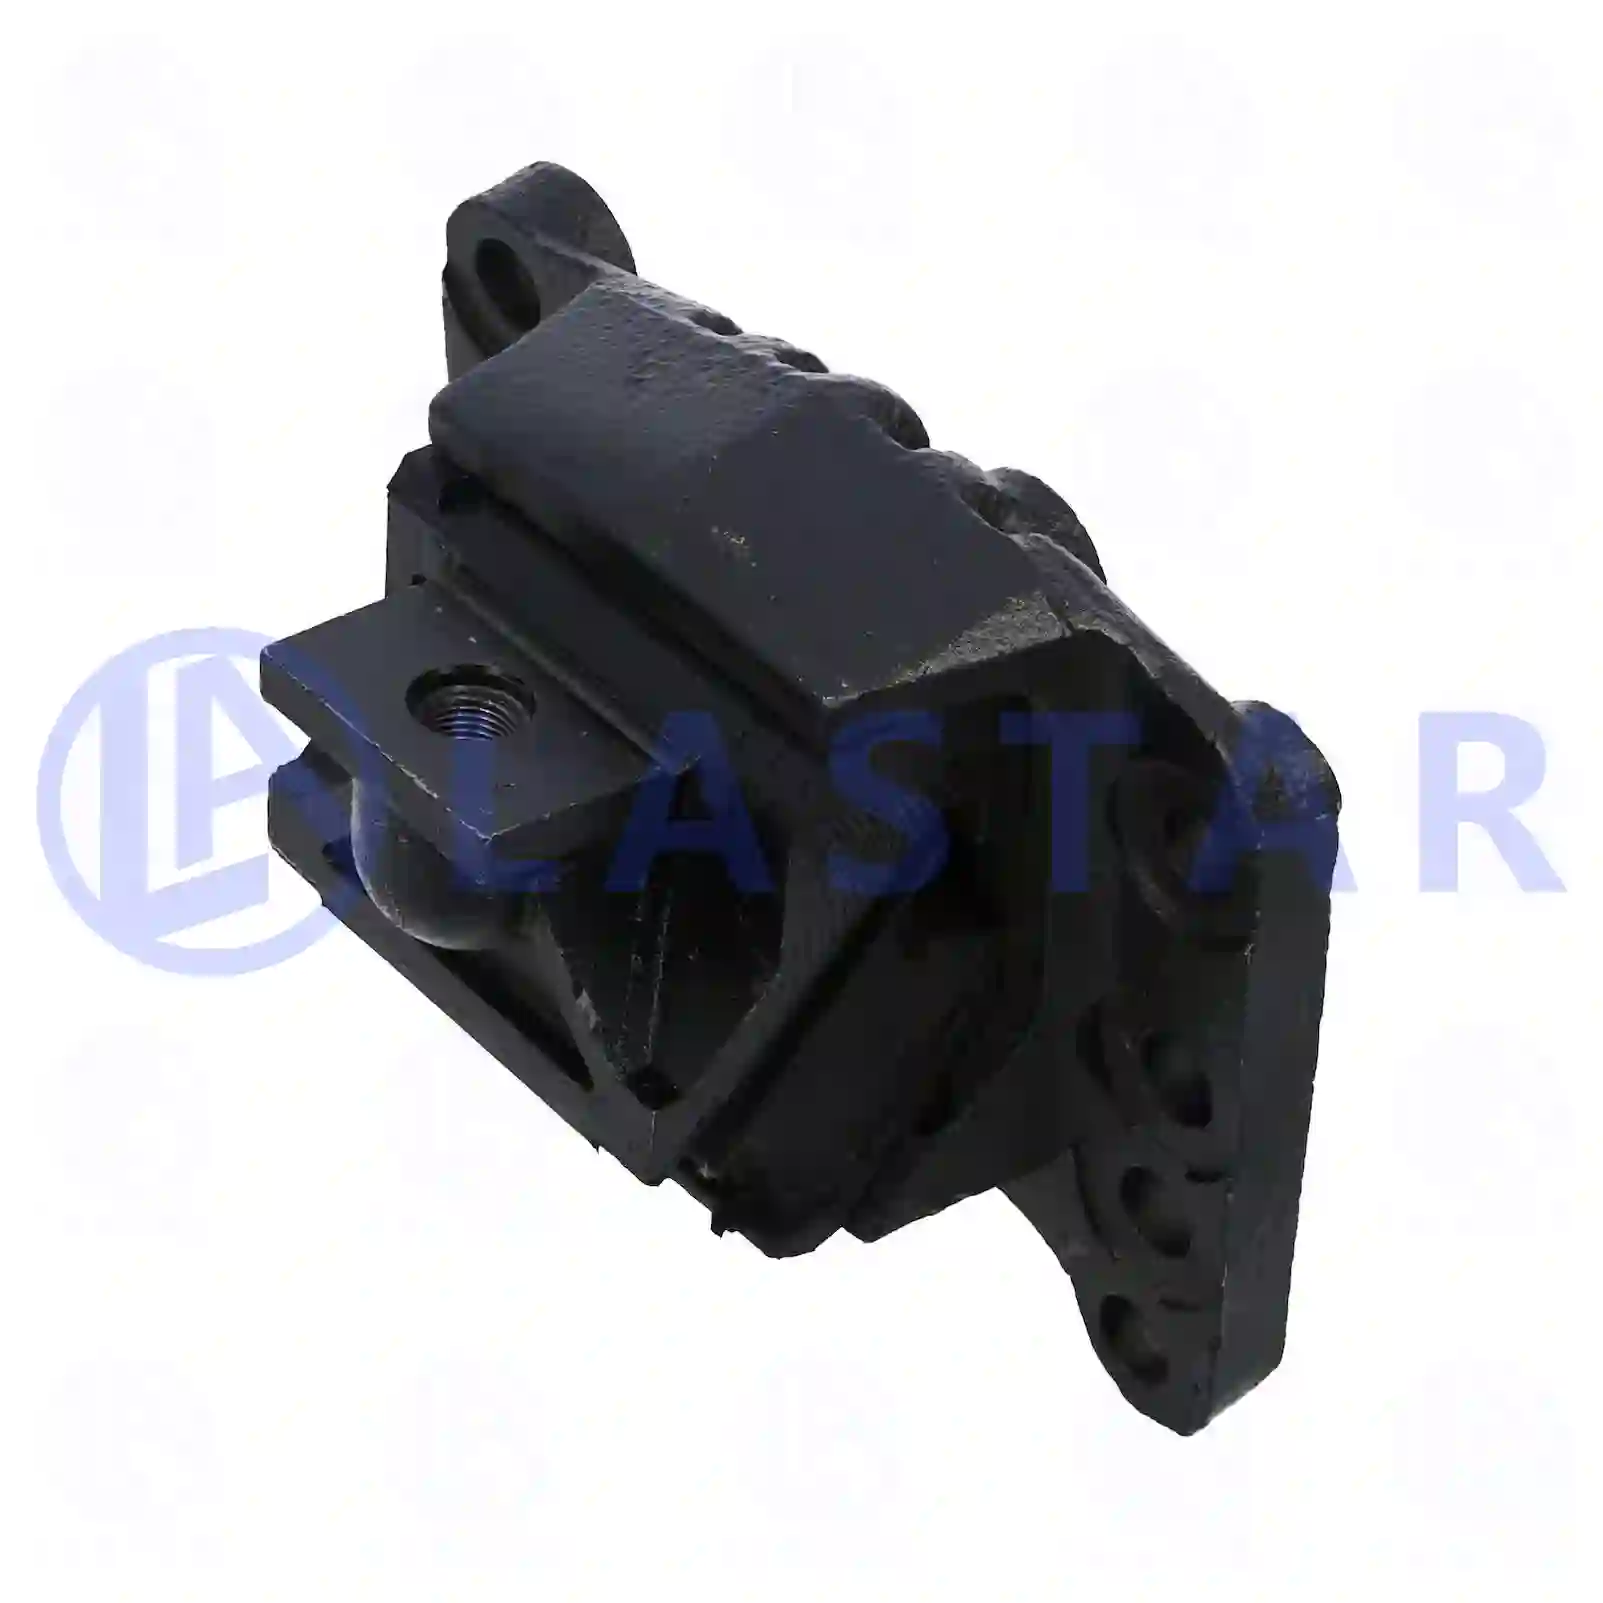 Engine mounting, 77700119, 480339, 6552410013, 6552410613, 6562410335 ||  77700119 Lastar Spare Part | Truck Spare Parts, Auotomotive Spare Parts Engine mounting, 77700119, 480339, 6552410013, 6552410613, 6562410335 ||  77700119 Lastar Spare Part | Truck Spare Parts, Auotomotive Spare Parts